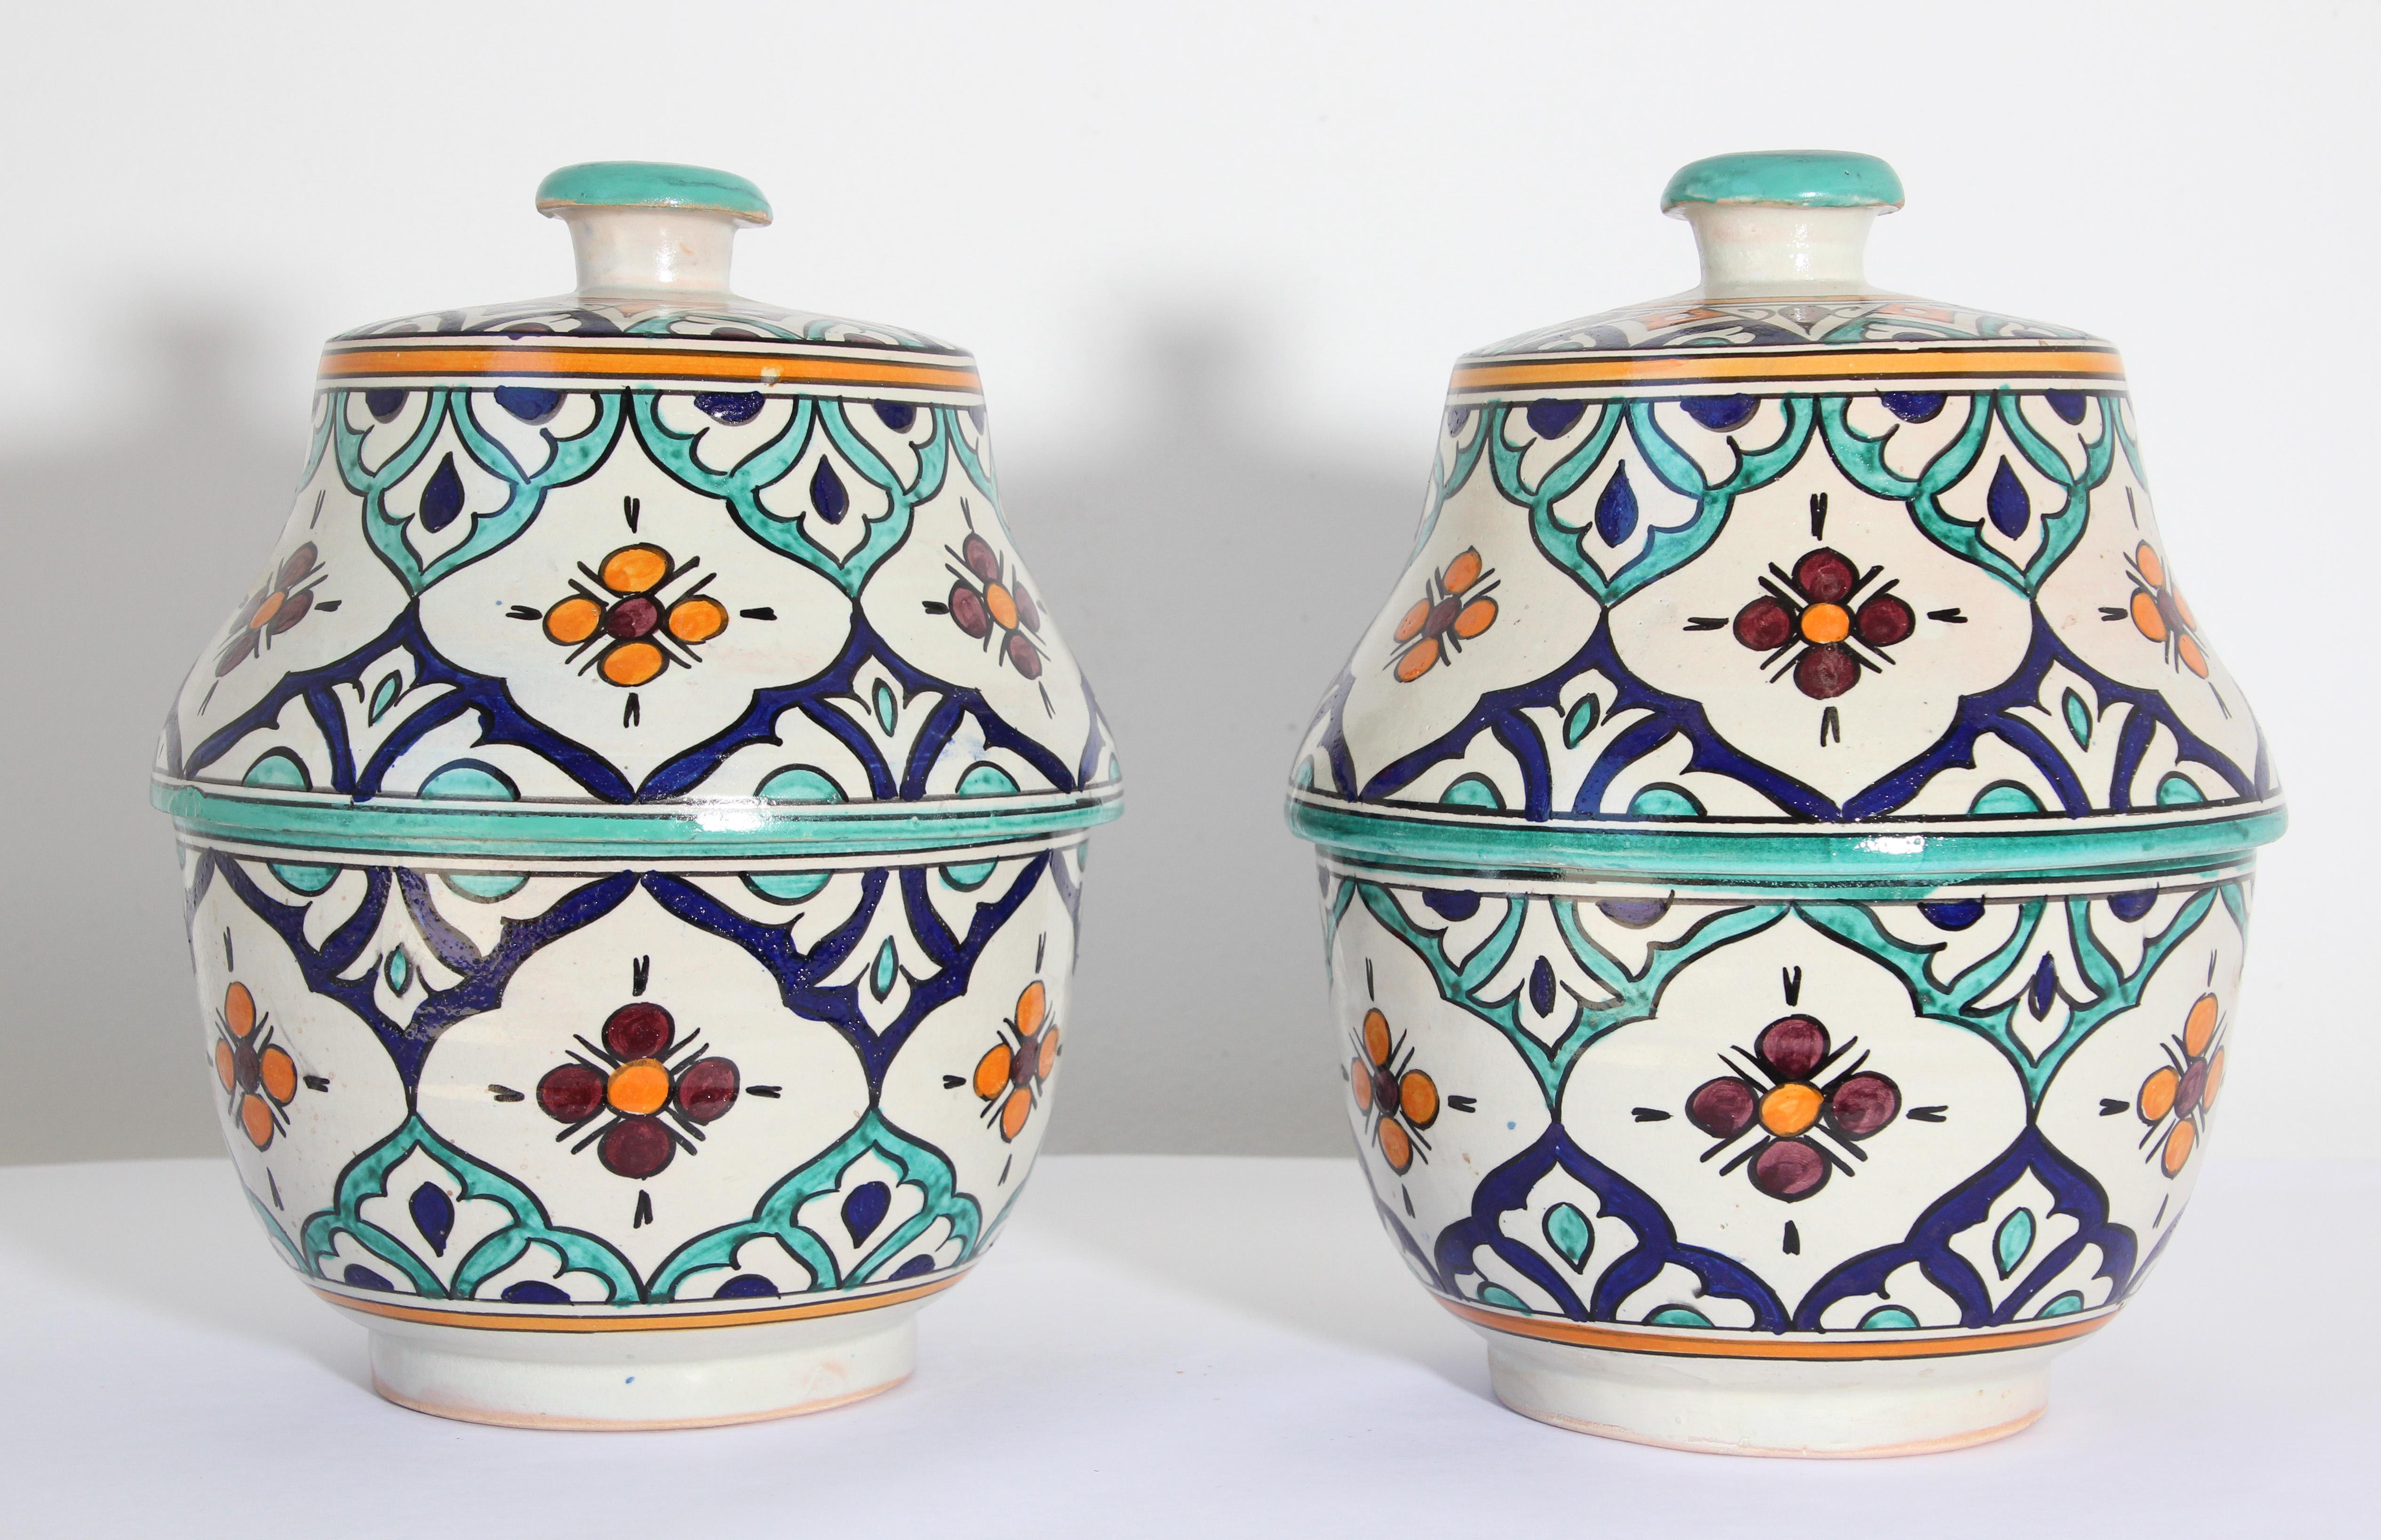 Large pair of Moorish Moroccan glazed polychrome ceramic jars tureen with cover.
Hand painted ceramic Jubbana, handcrafted by skilled Moroccan artisans in Fez Morocco.
Moorish designs in turquoise, cobalt blue, teal, saffron yellow, prune and